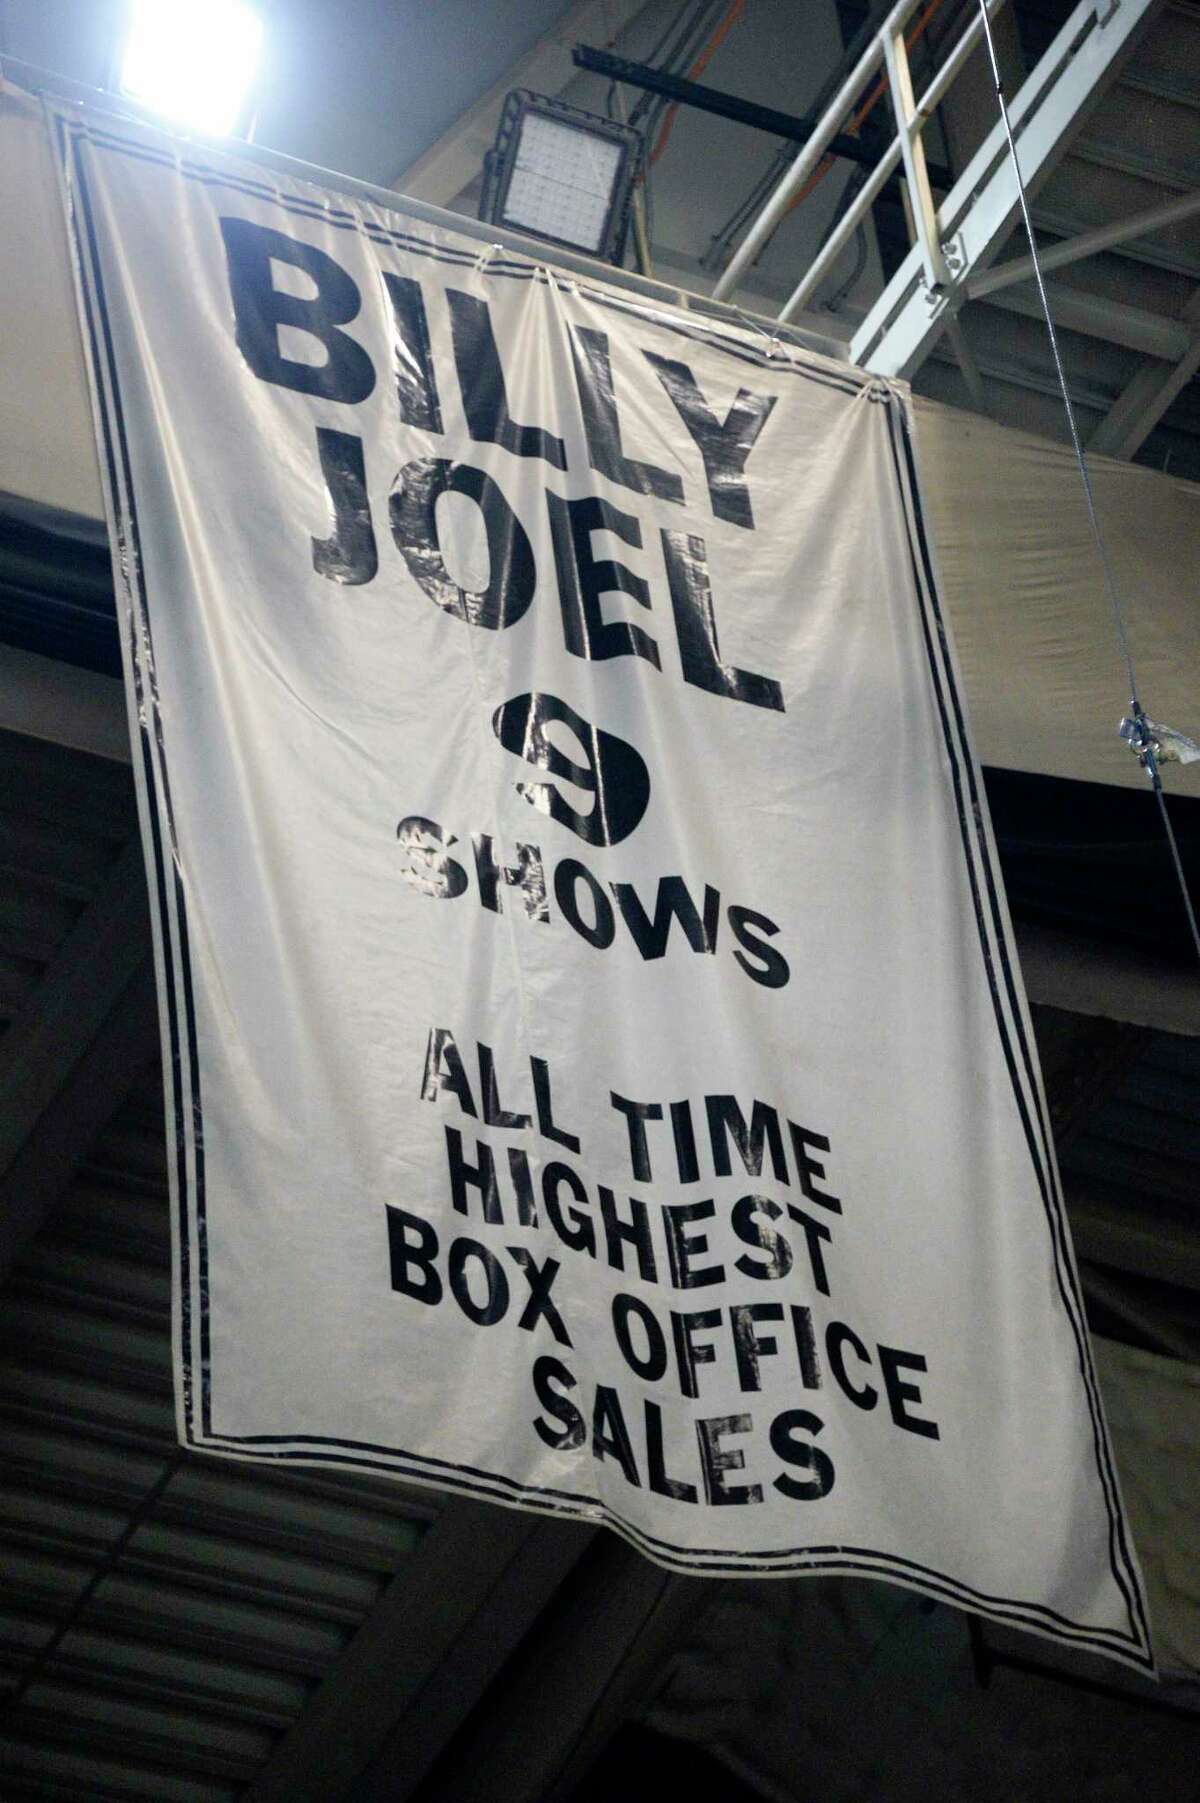 The Billy Joel banner inside of the Times Union Center on Tuesday, Oct. 2, 2018, in Albany, N.Y. In 2007, the Times Union purchased the arena's naming rights. (John Carl D'Annibale/Times Union)